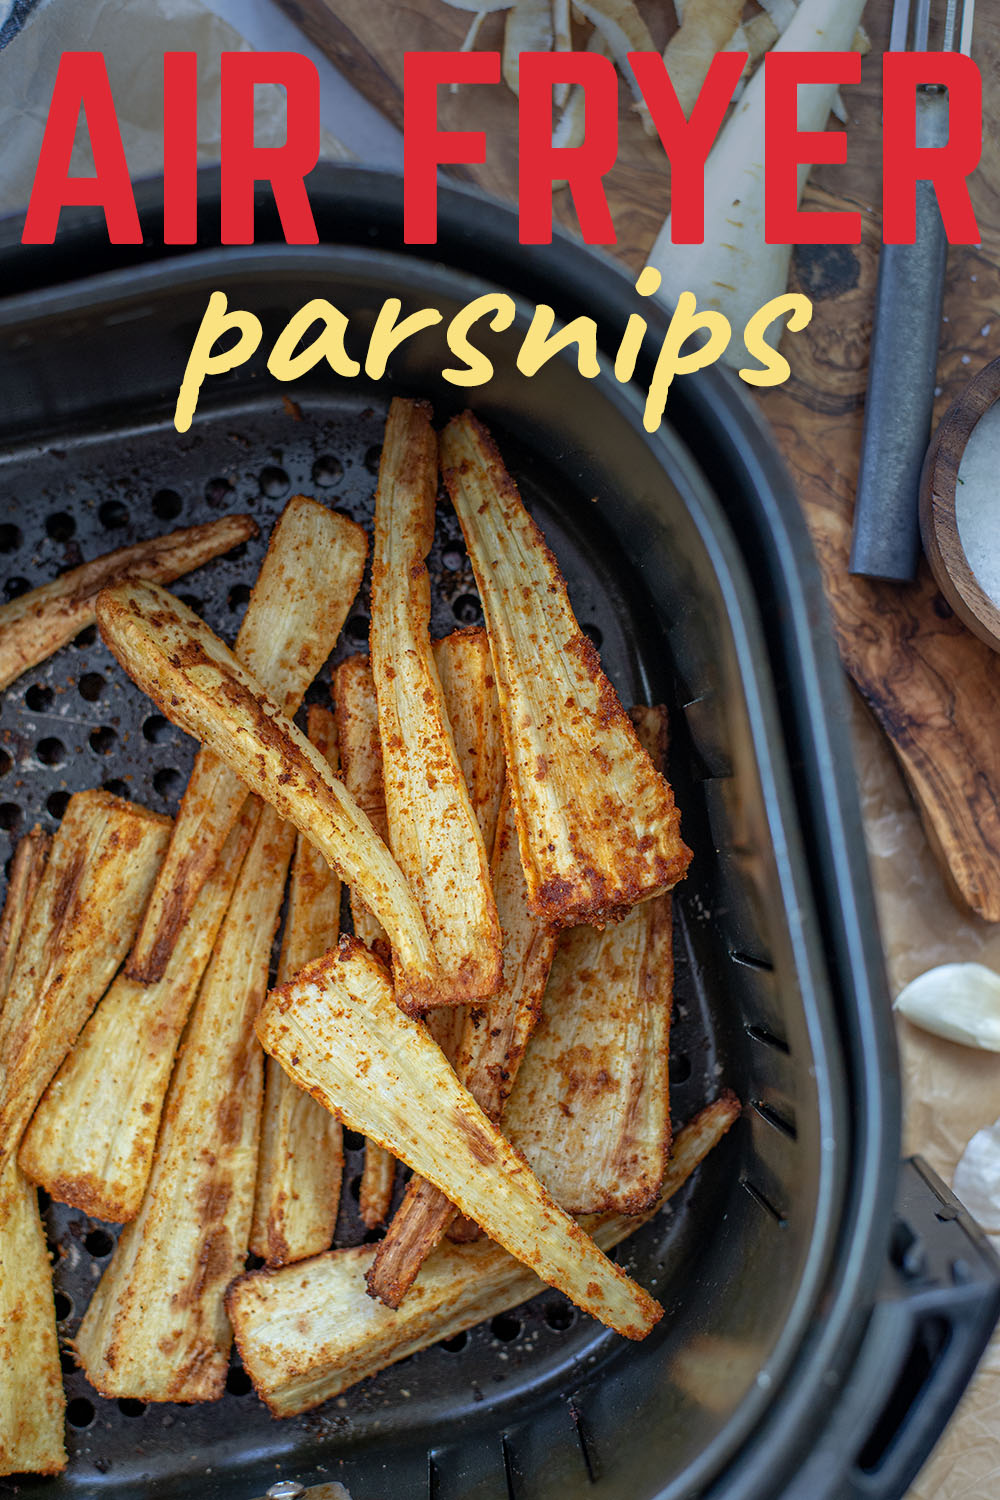 These parsnips are a savoroy treat that pair great with a chicken or pork meal!